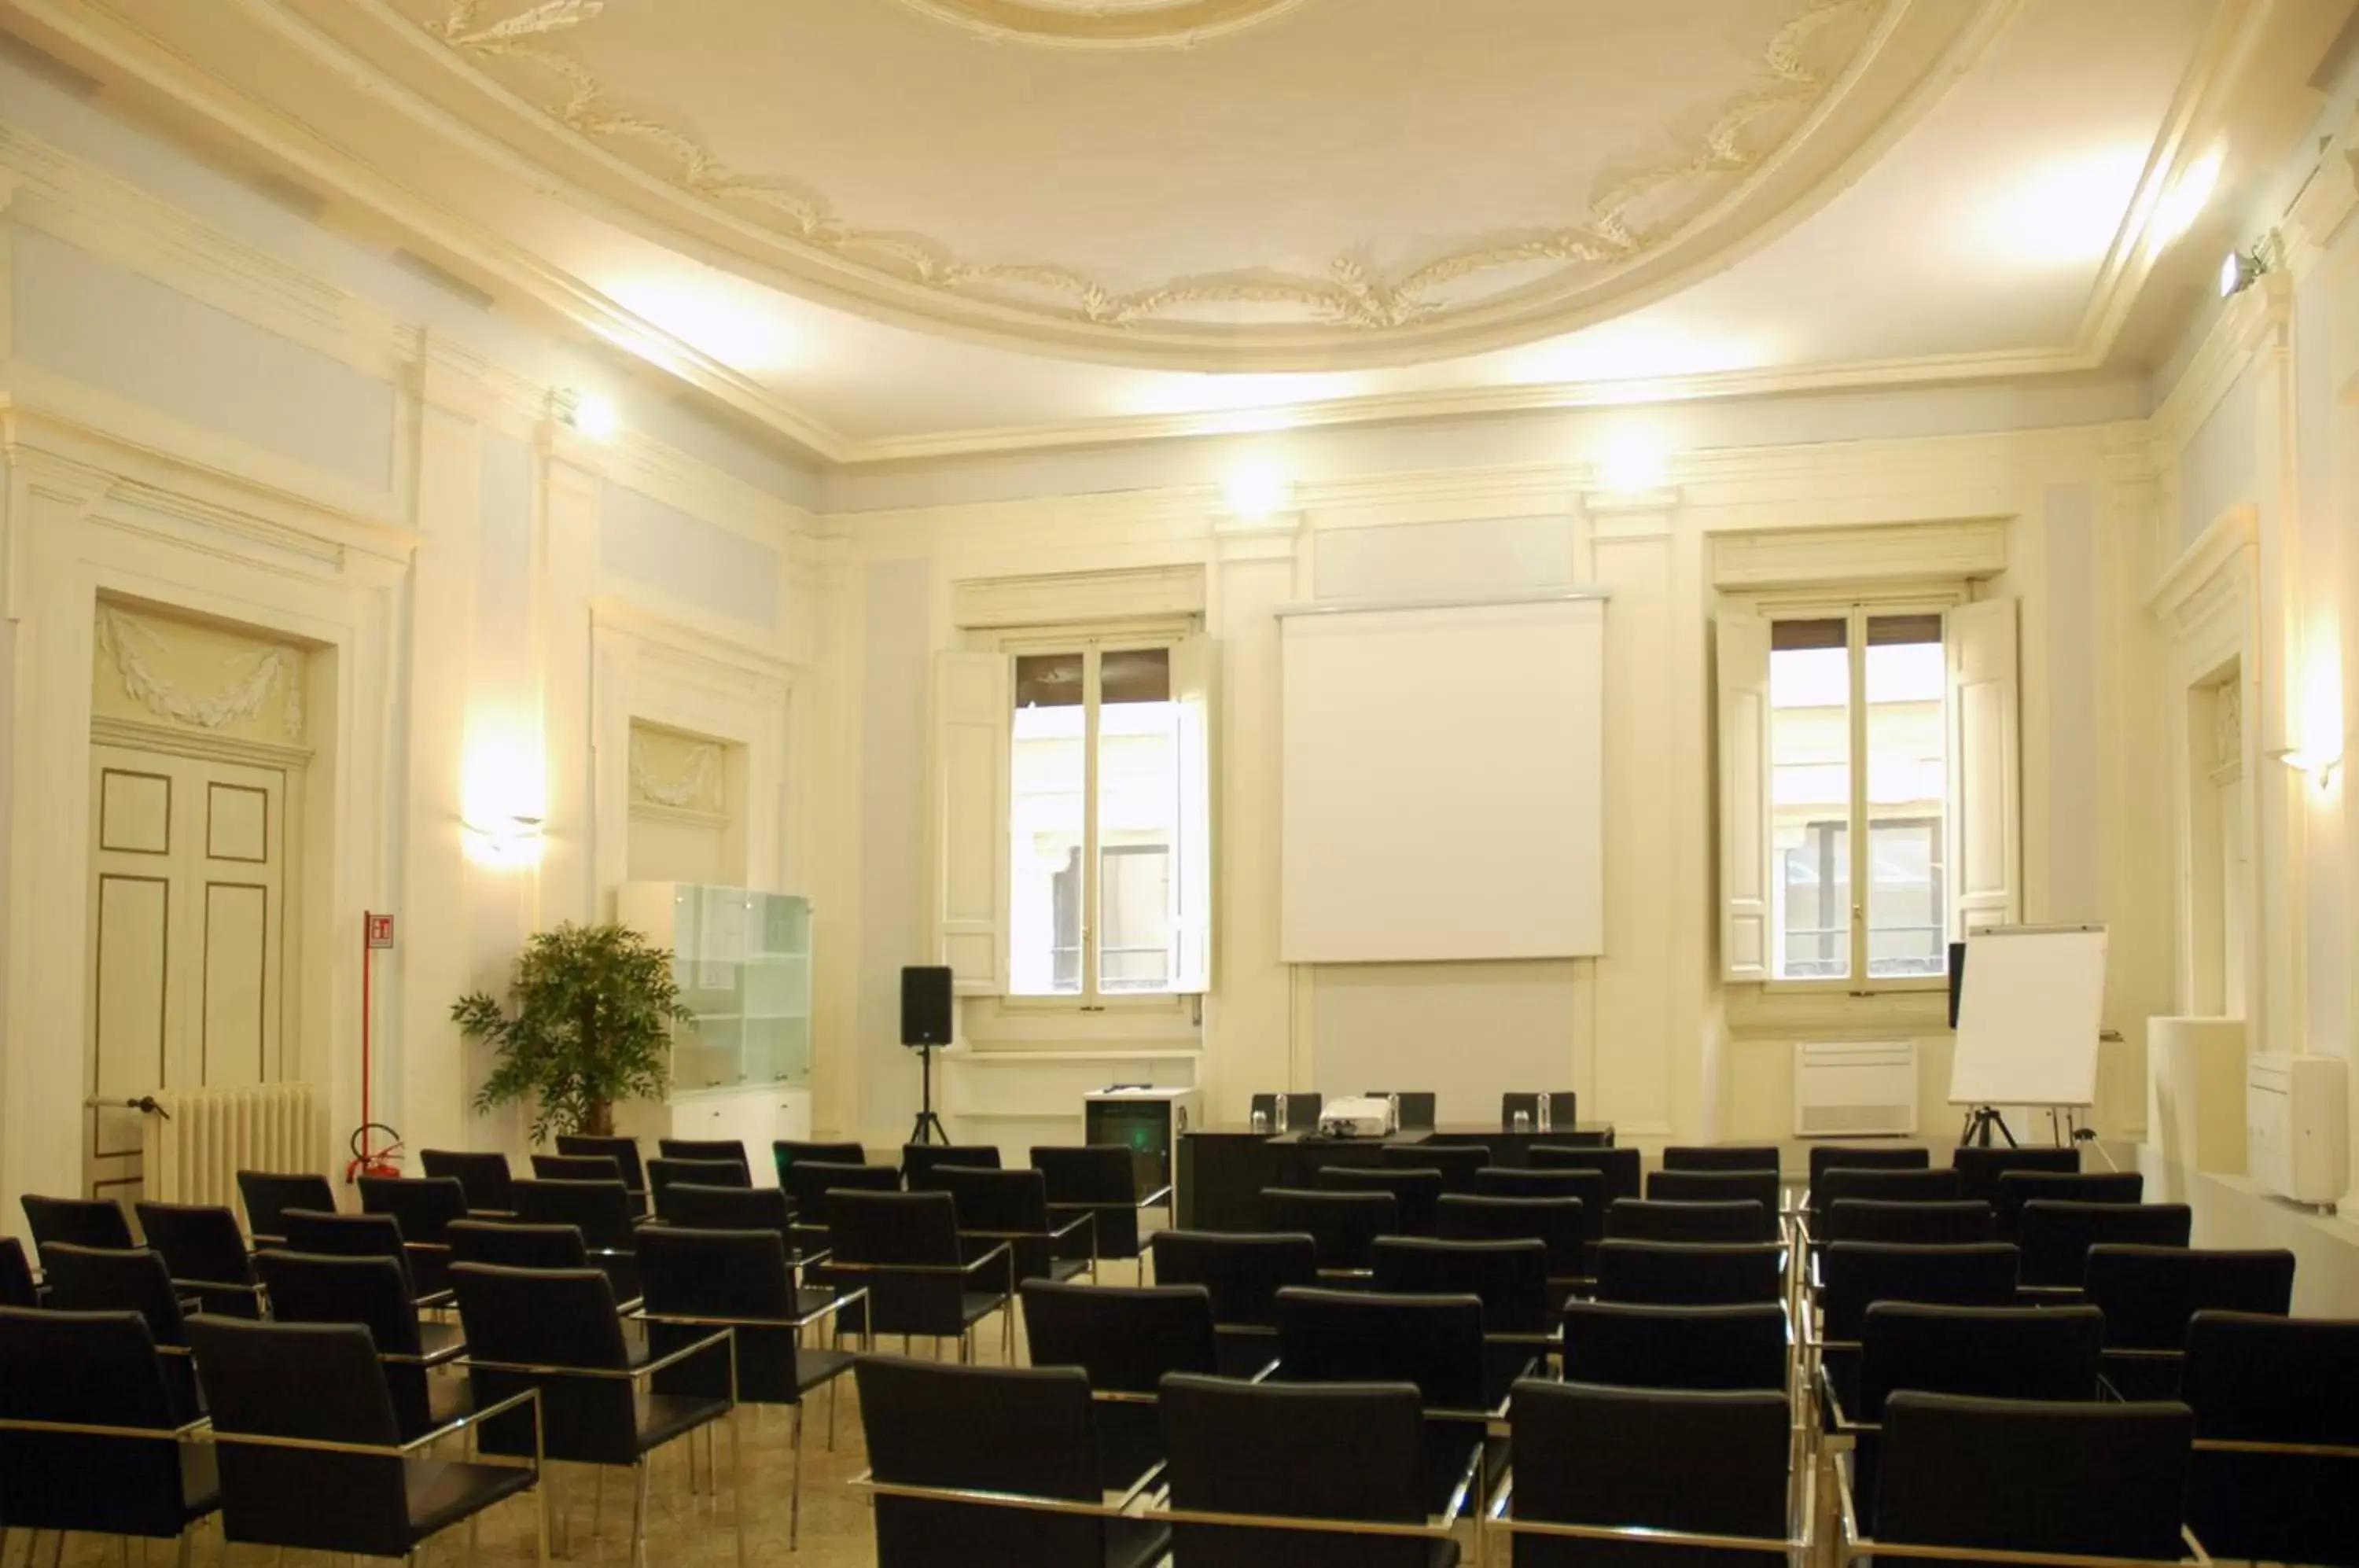 Business facilities in Relais Hotel Centrale "Dimora Storica"